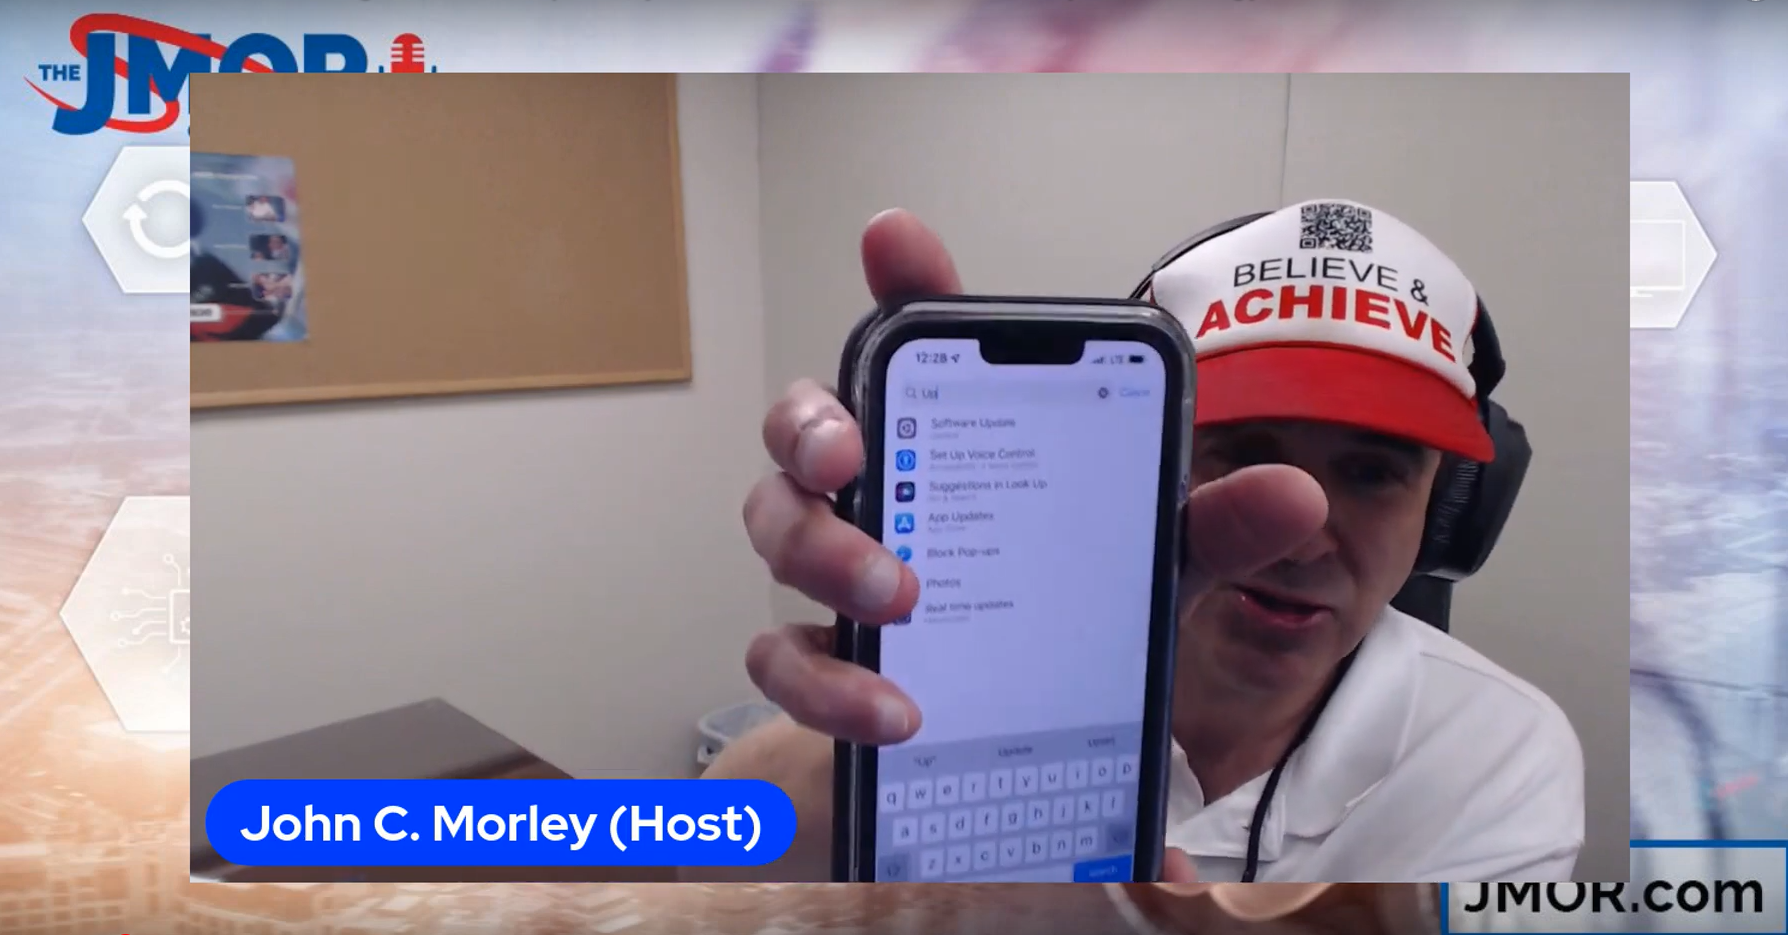 JMOR Tech Talk Show August 19, 2022: Update your iPhone Now & Anti-Party Technology